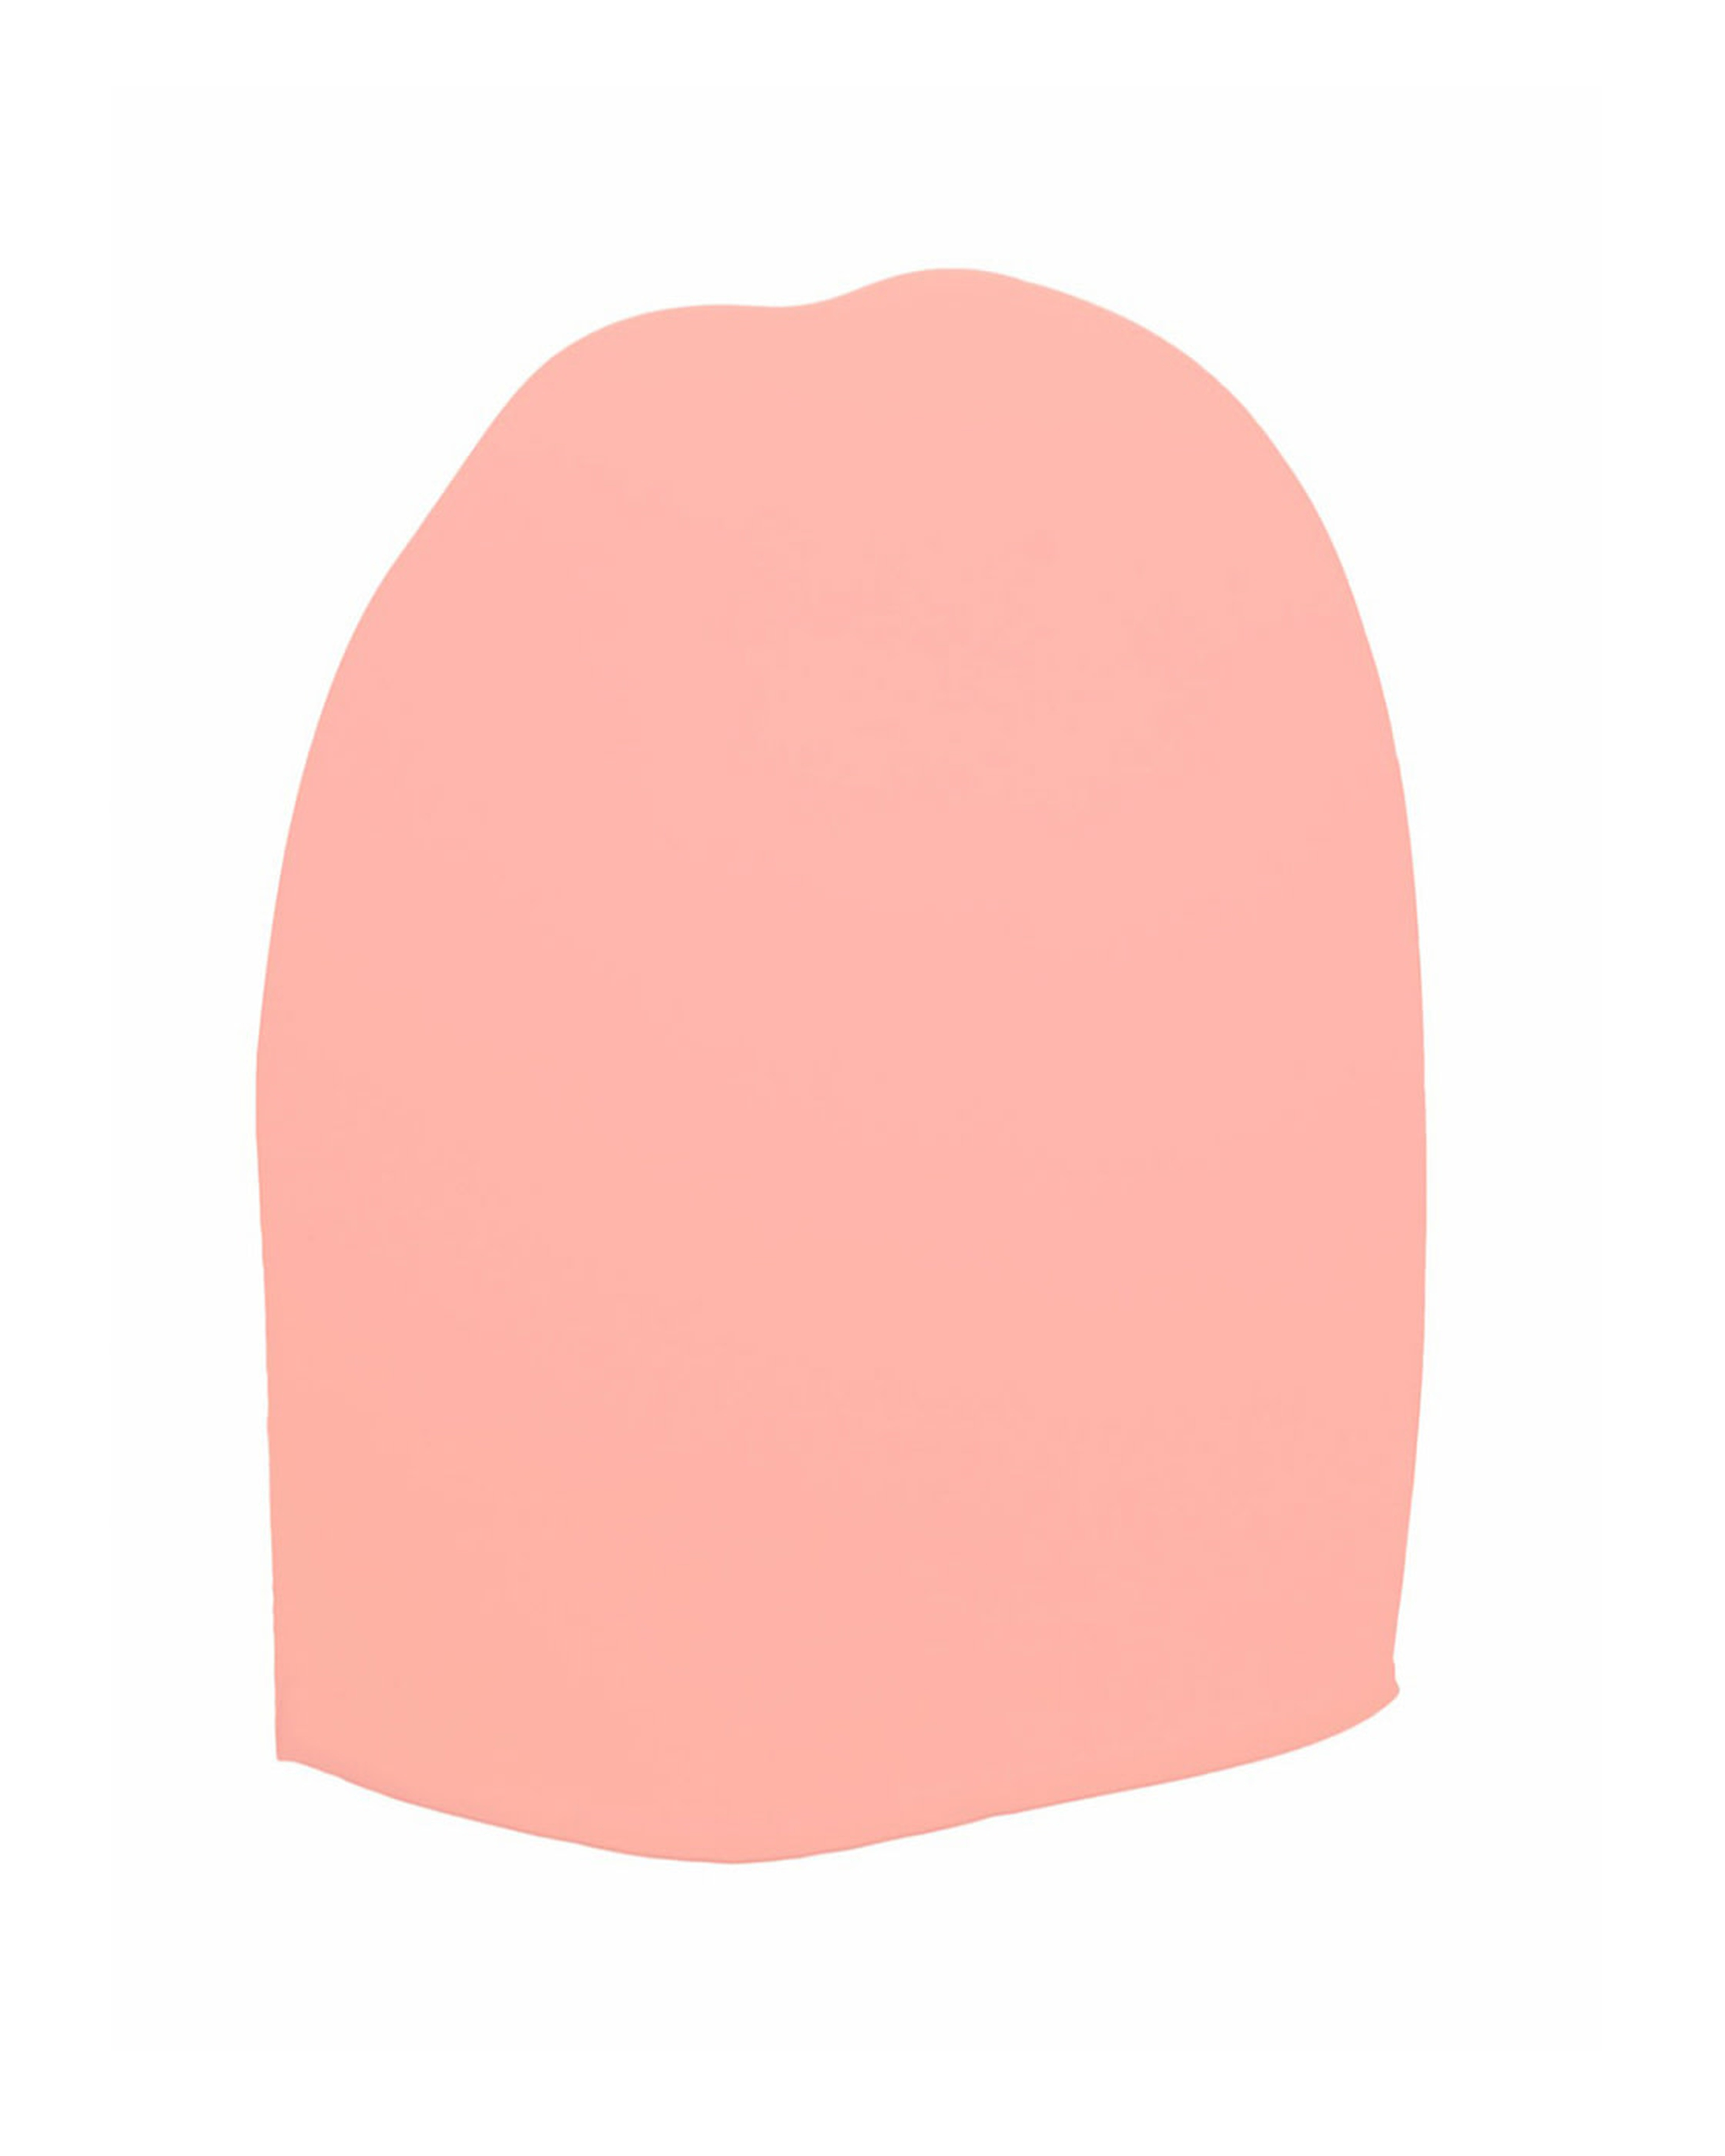 Clare Paint - Rosé Season - Wall Swatch - Clare Paint